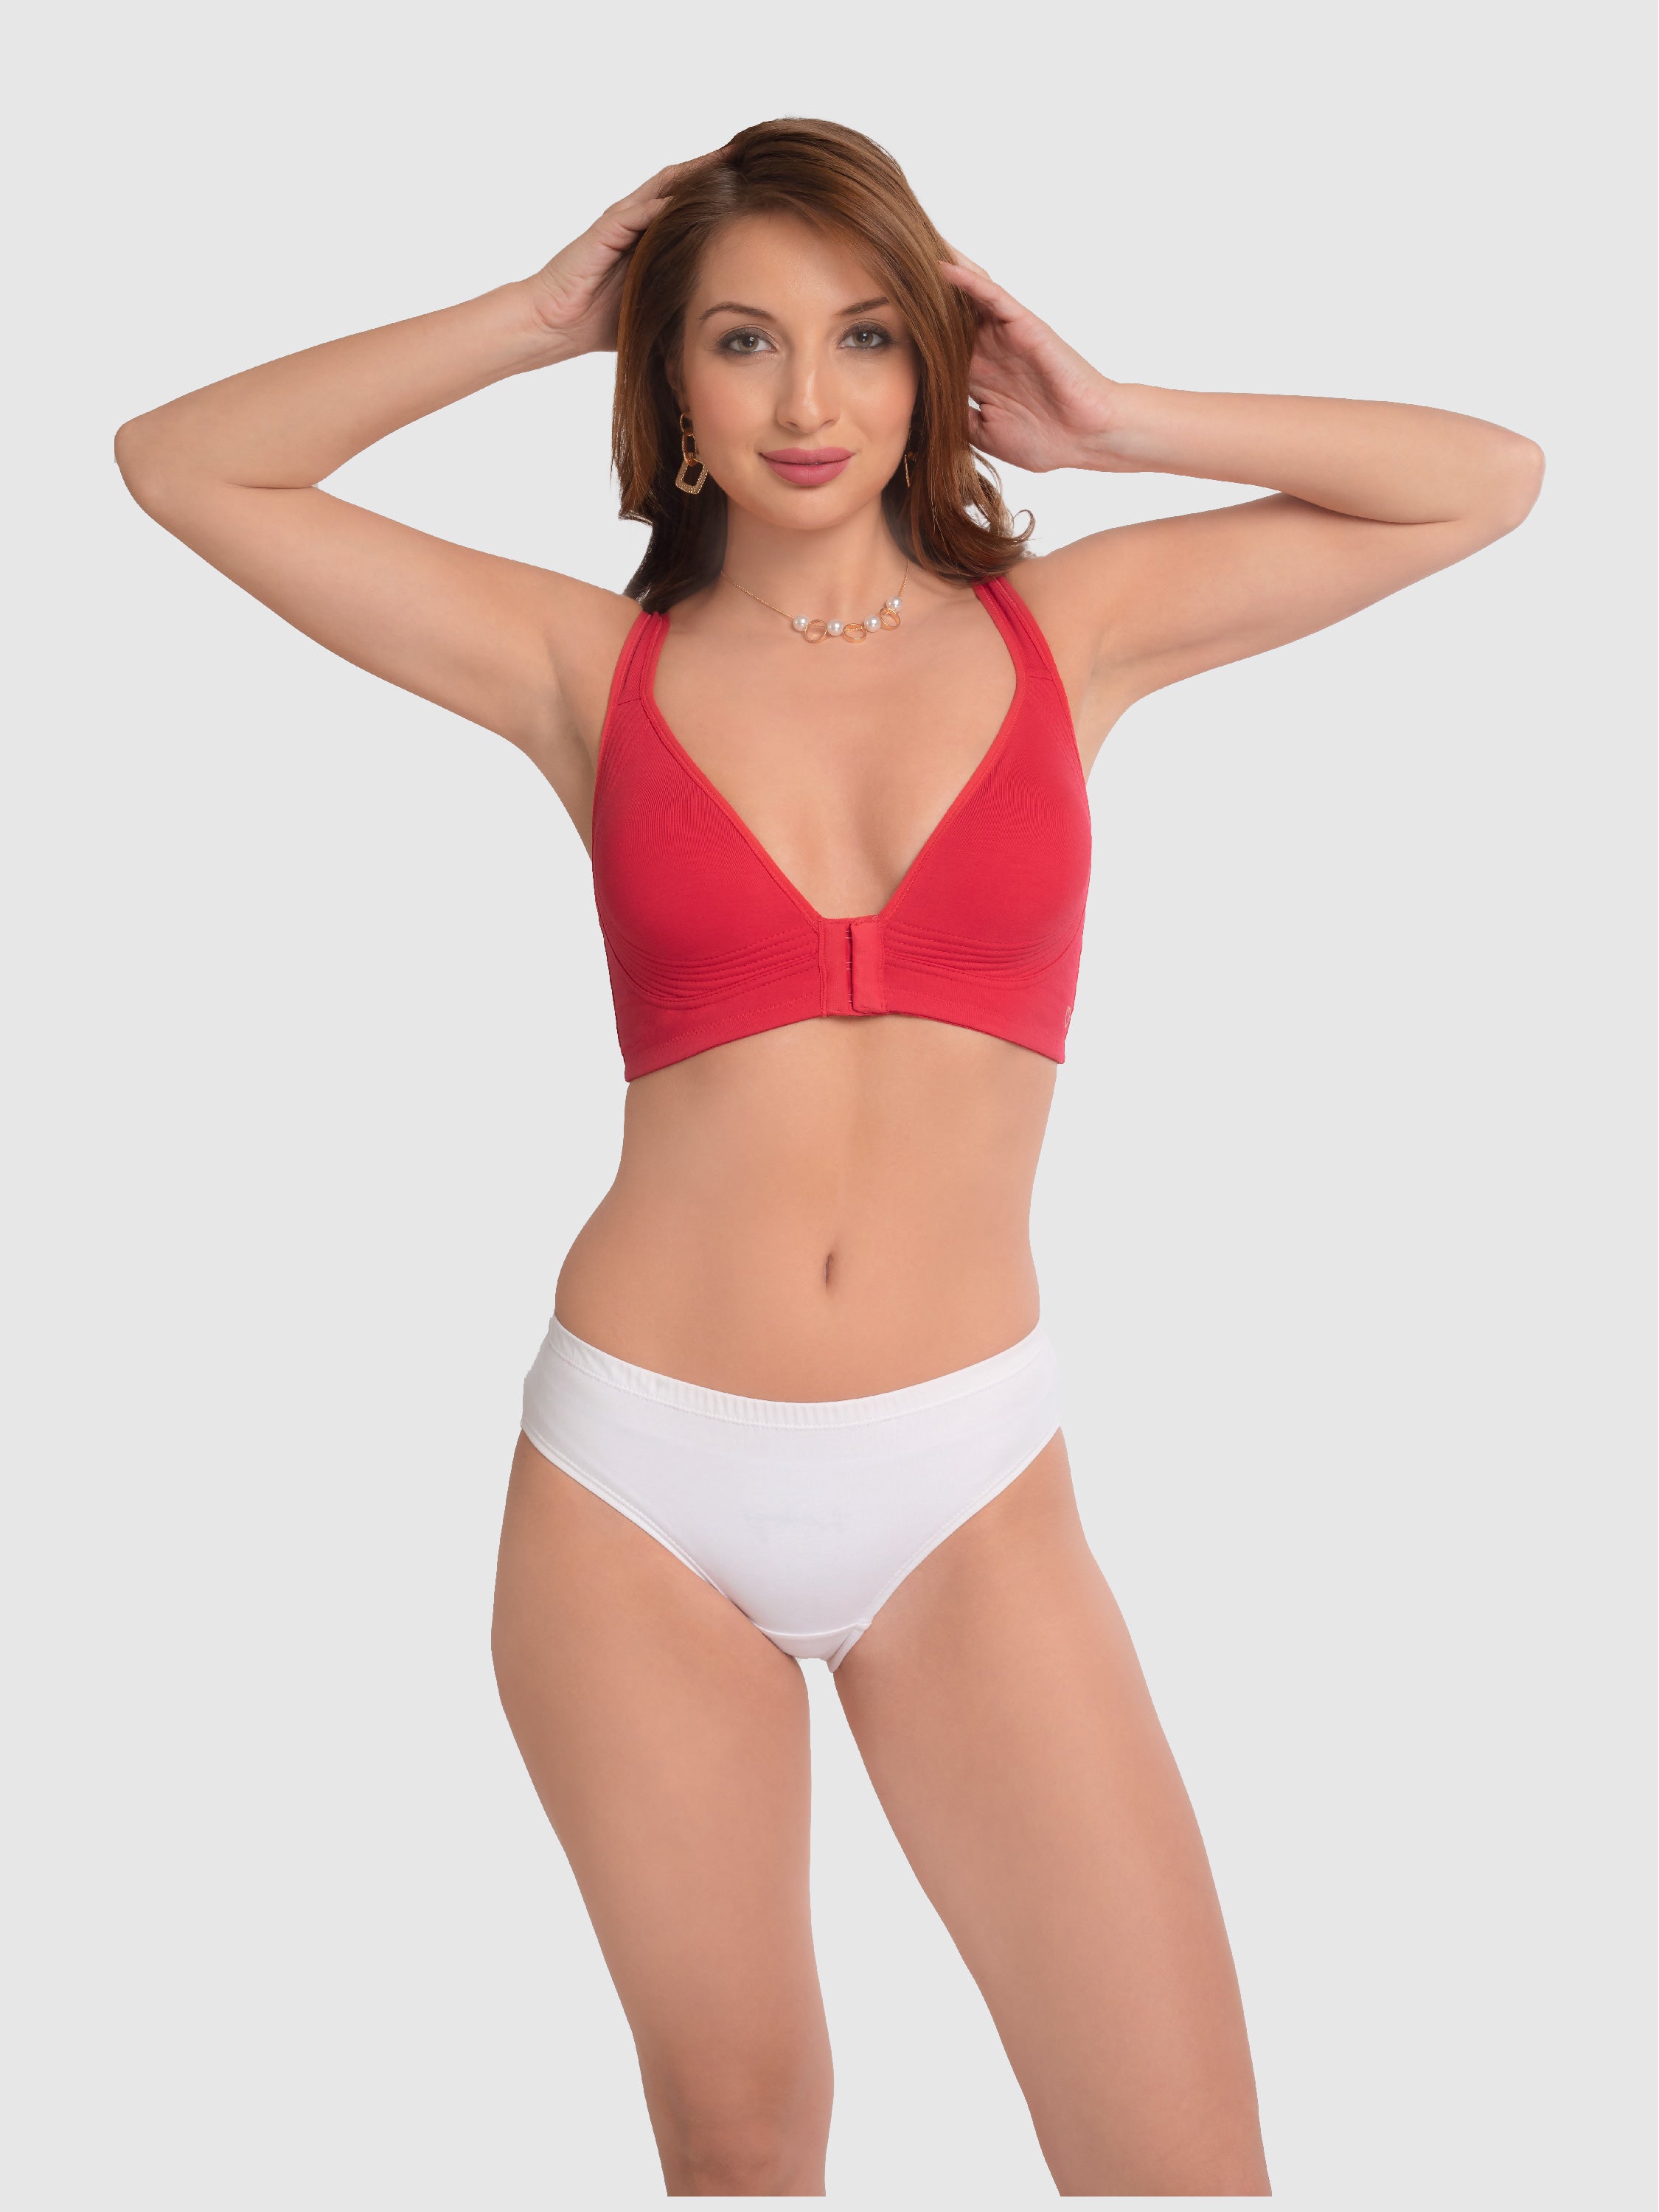 Daisy Dee Prime Red Non Padded Non-Wired Full Coverage Front Open Bra - NRIA-Prime Red